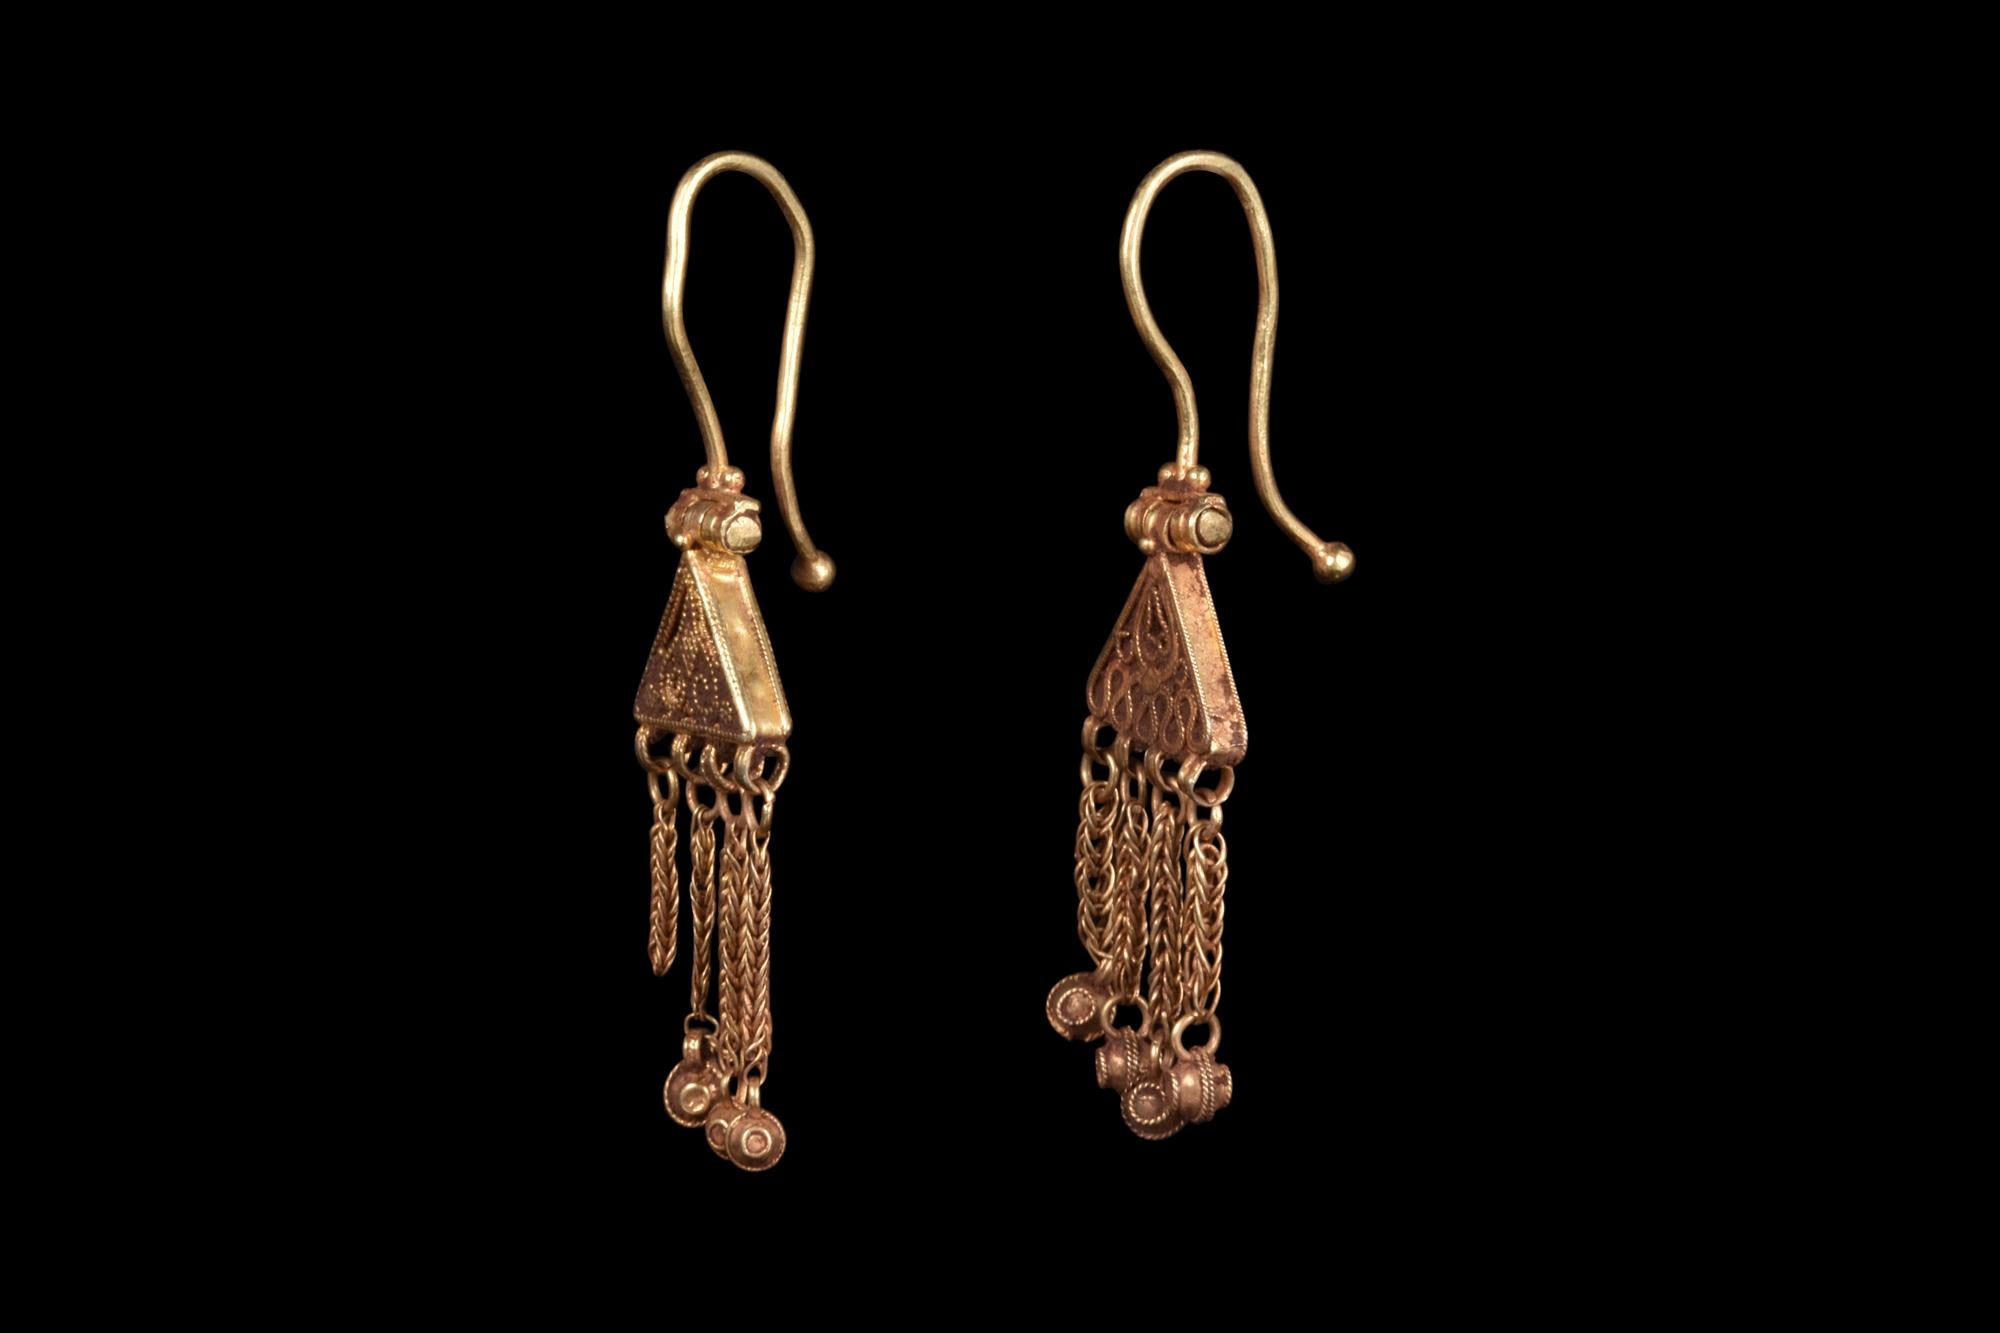 A stunning matched pair of Byzantine gold earrings, each comprised of a hinged and elongated hoop attached to a triangular-shaped plaque with an openwork filigree decoration. Suspended below are four chain dangles with intricately decorated gold